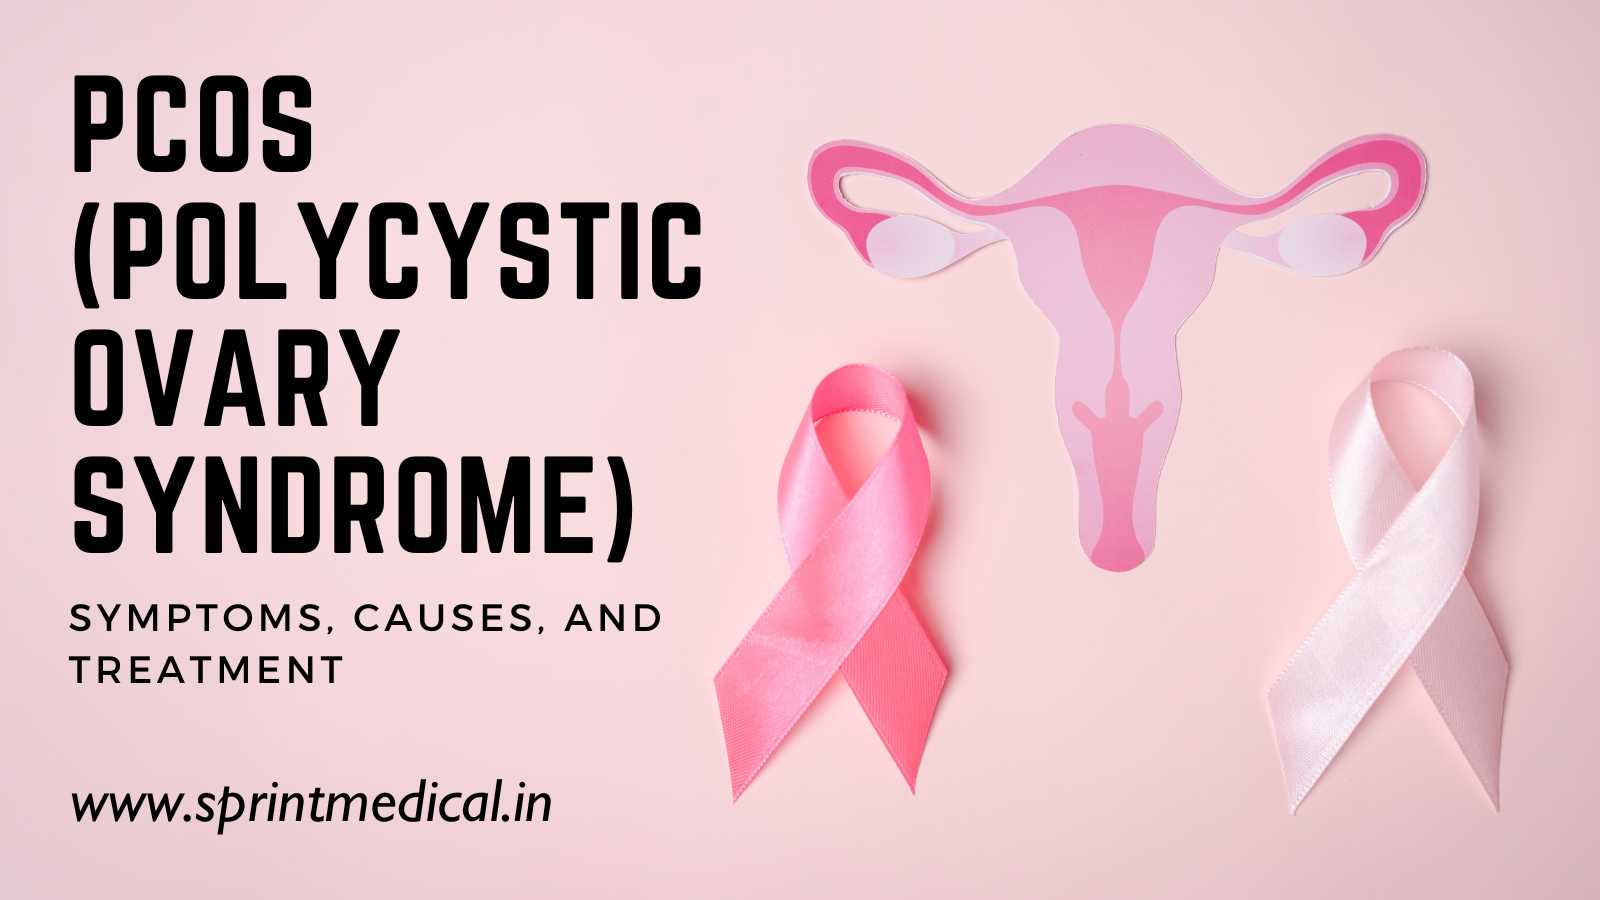 PCOS (Polycystic Ovary Syndrome) Symptoms, Causes, and Treatment